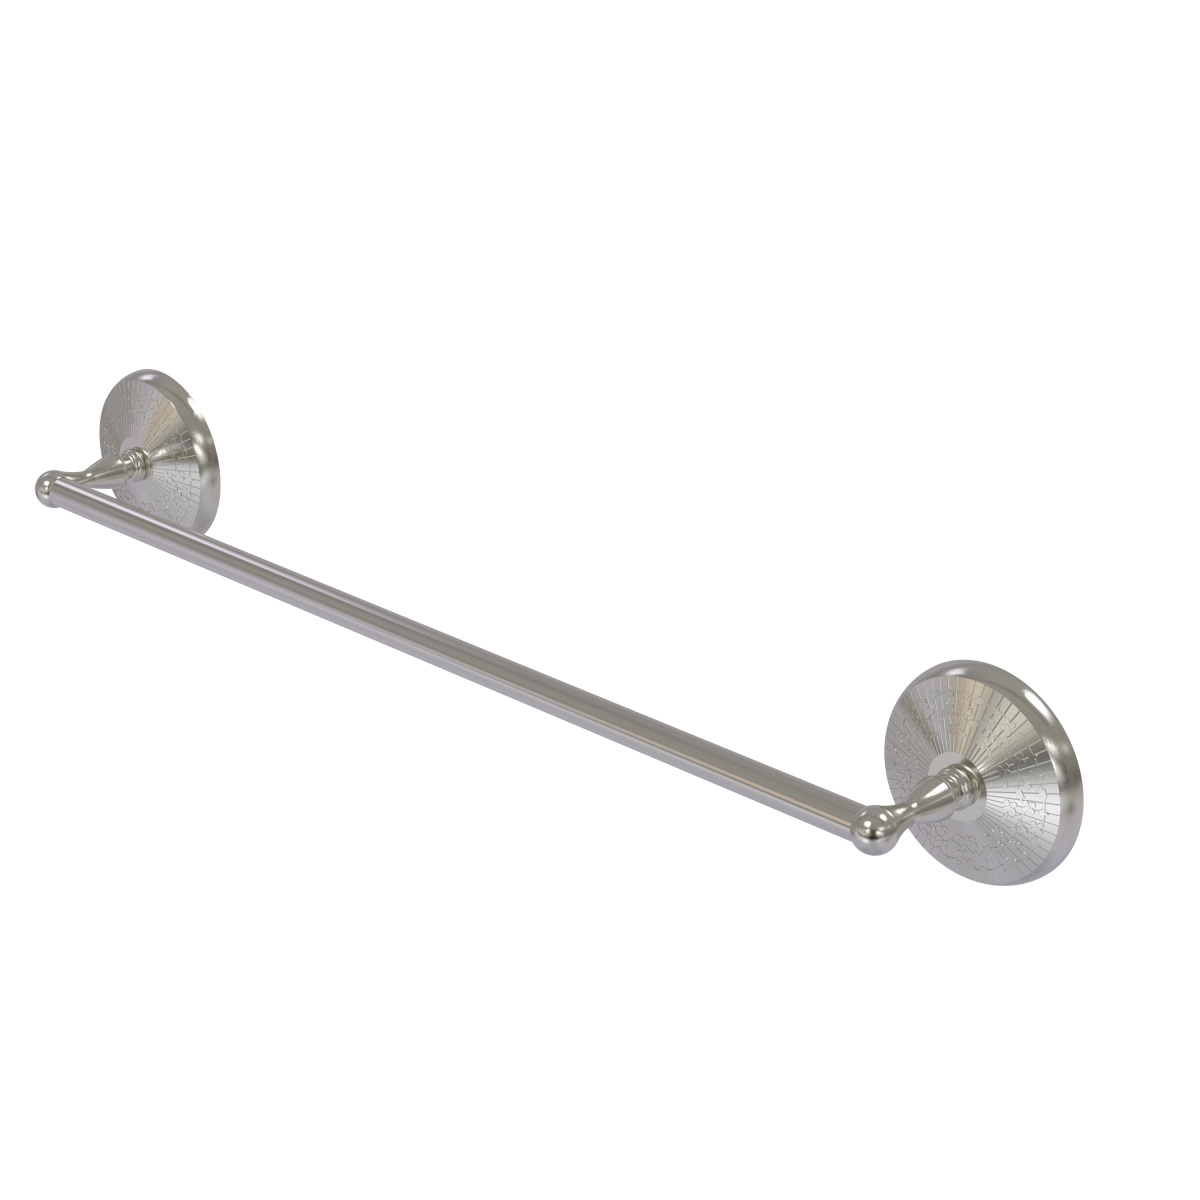 Allied Brass MC-31-36-SN 36 in. Monte Carlo Collection Towel Bar, Satin Nickel - 3 x 39 x 36 in.